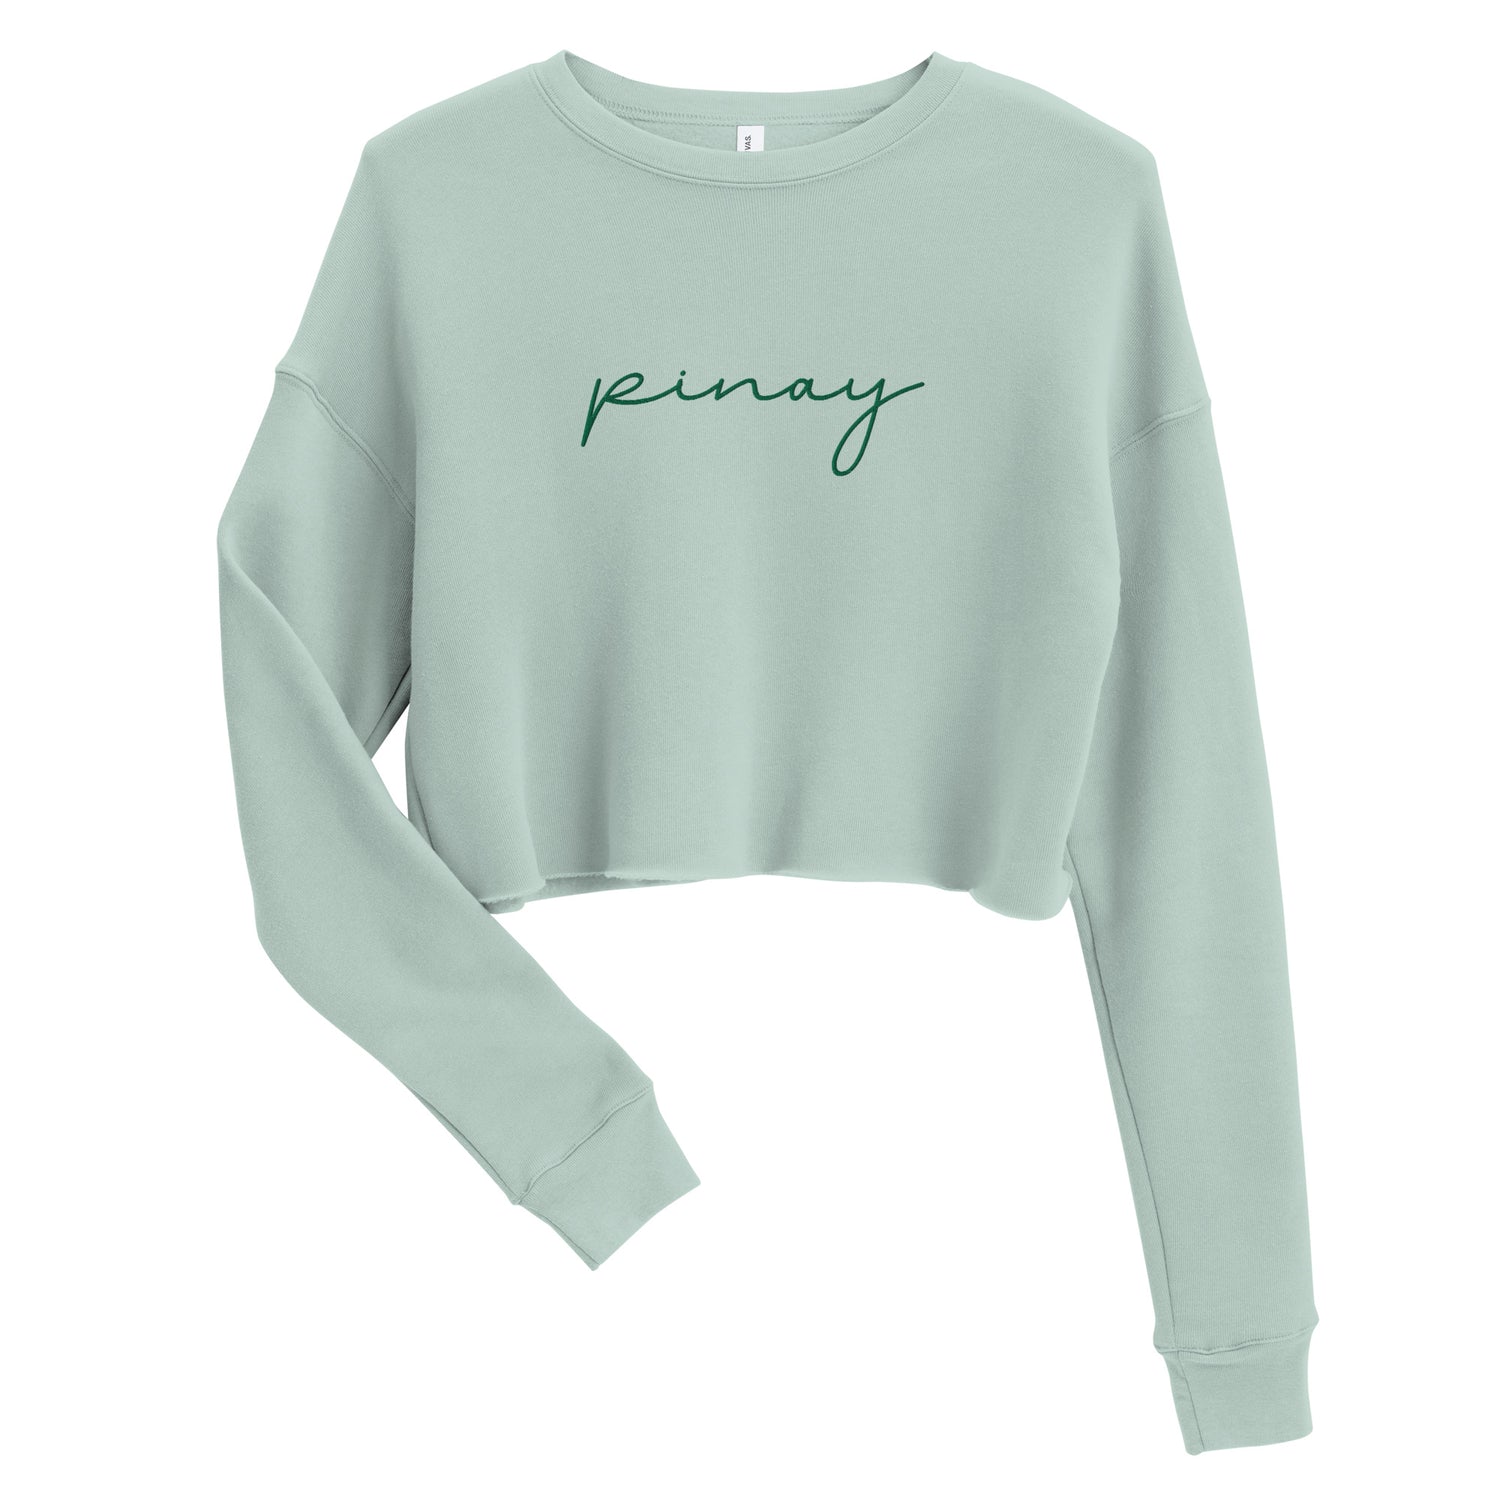 Filipino Crop Sweatshirt Pinay Statement Embroidered Merch in color variant Dusty Blue